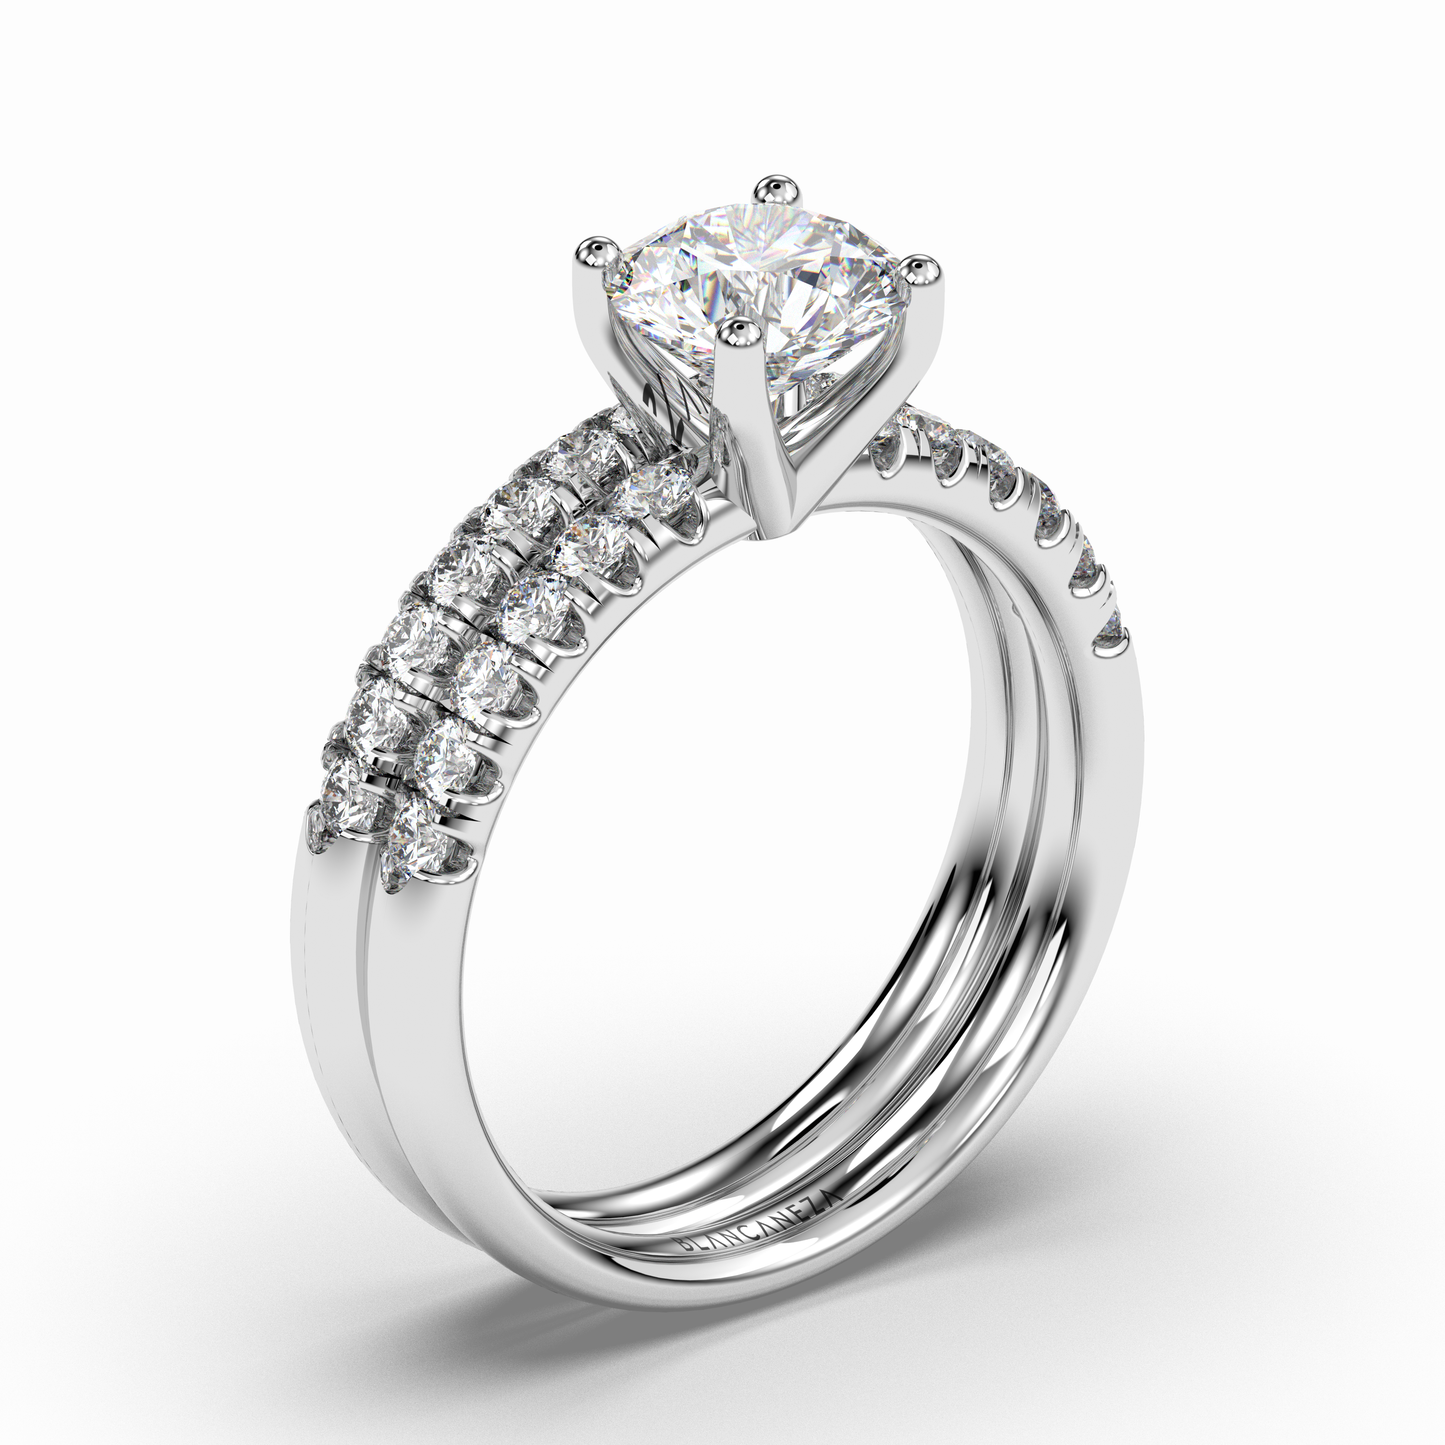 Ring Set simulated diamond crafted in sterling silver 18k white gold rhodium plated, standing side , main stone size 7mm